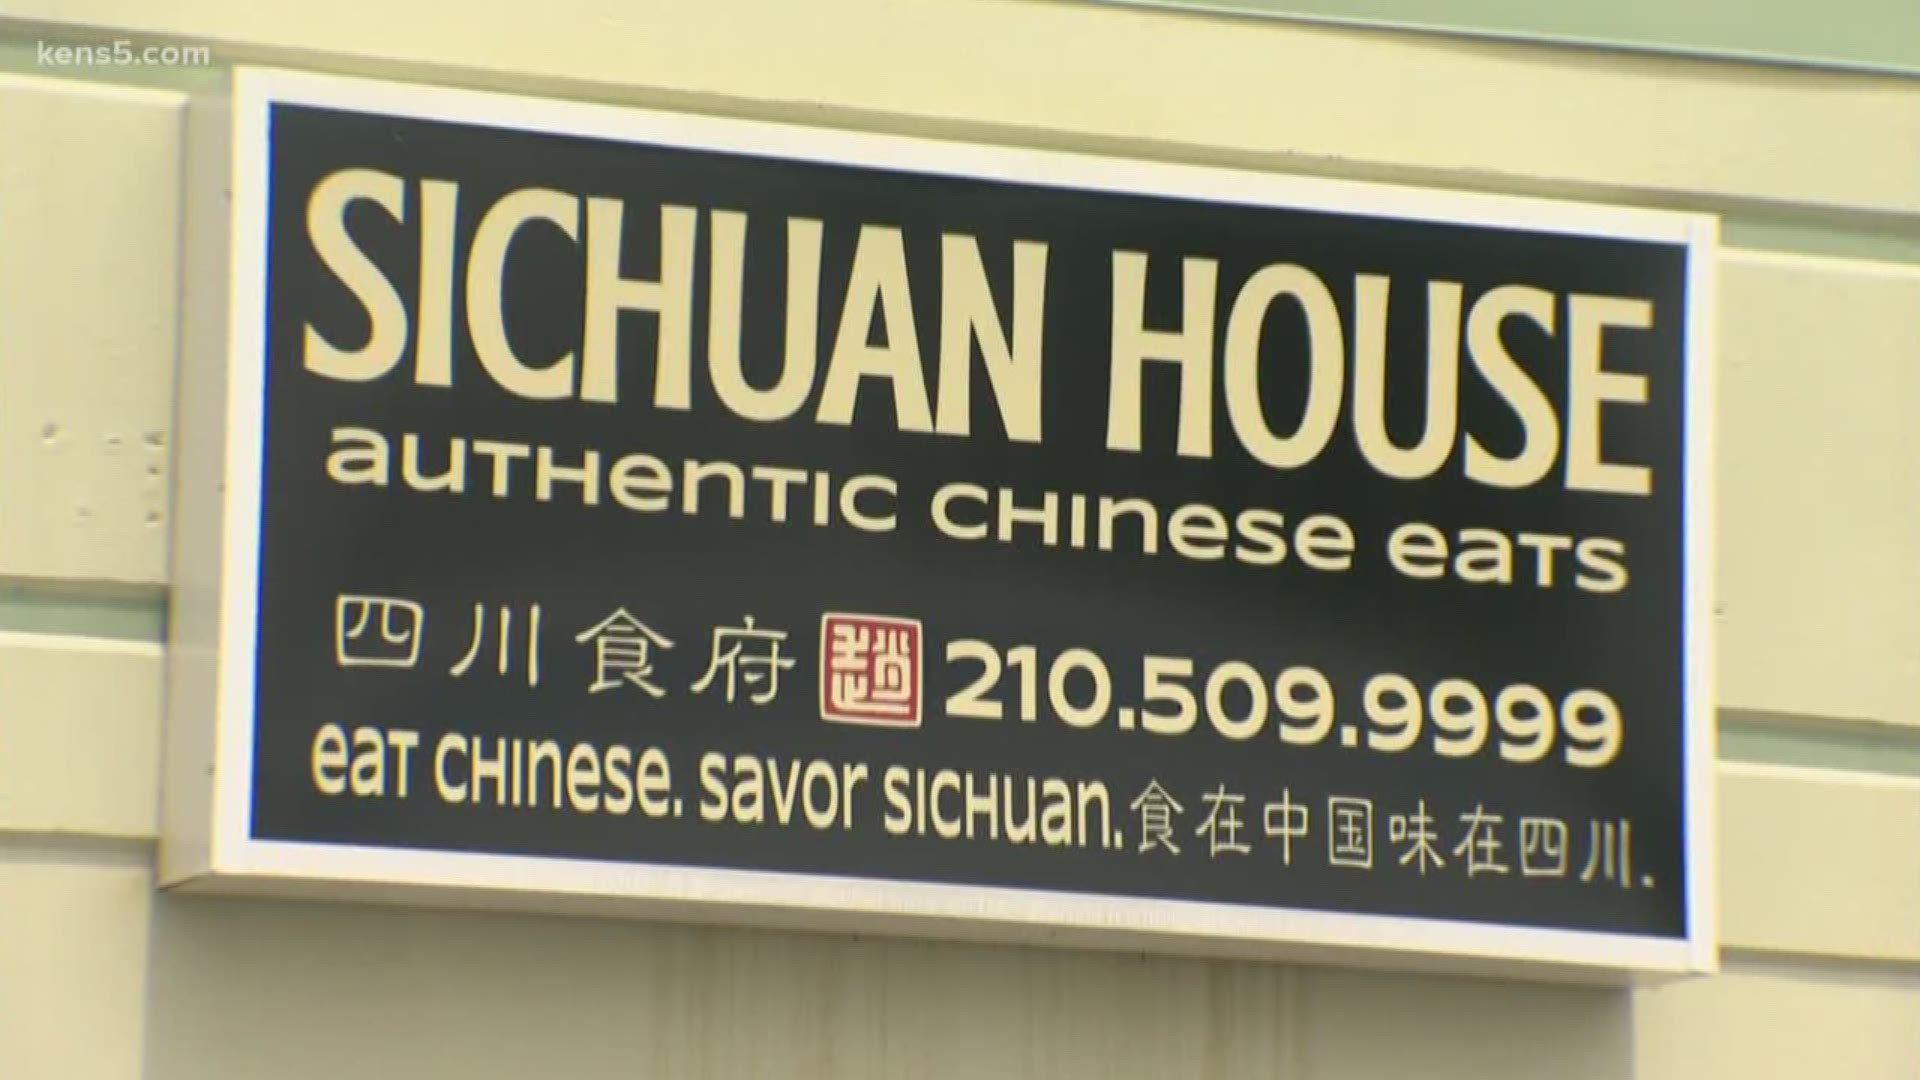 The Chinese restaurant opened in 2015. The owners hope everyone feels welcome to try their cuisine.